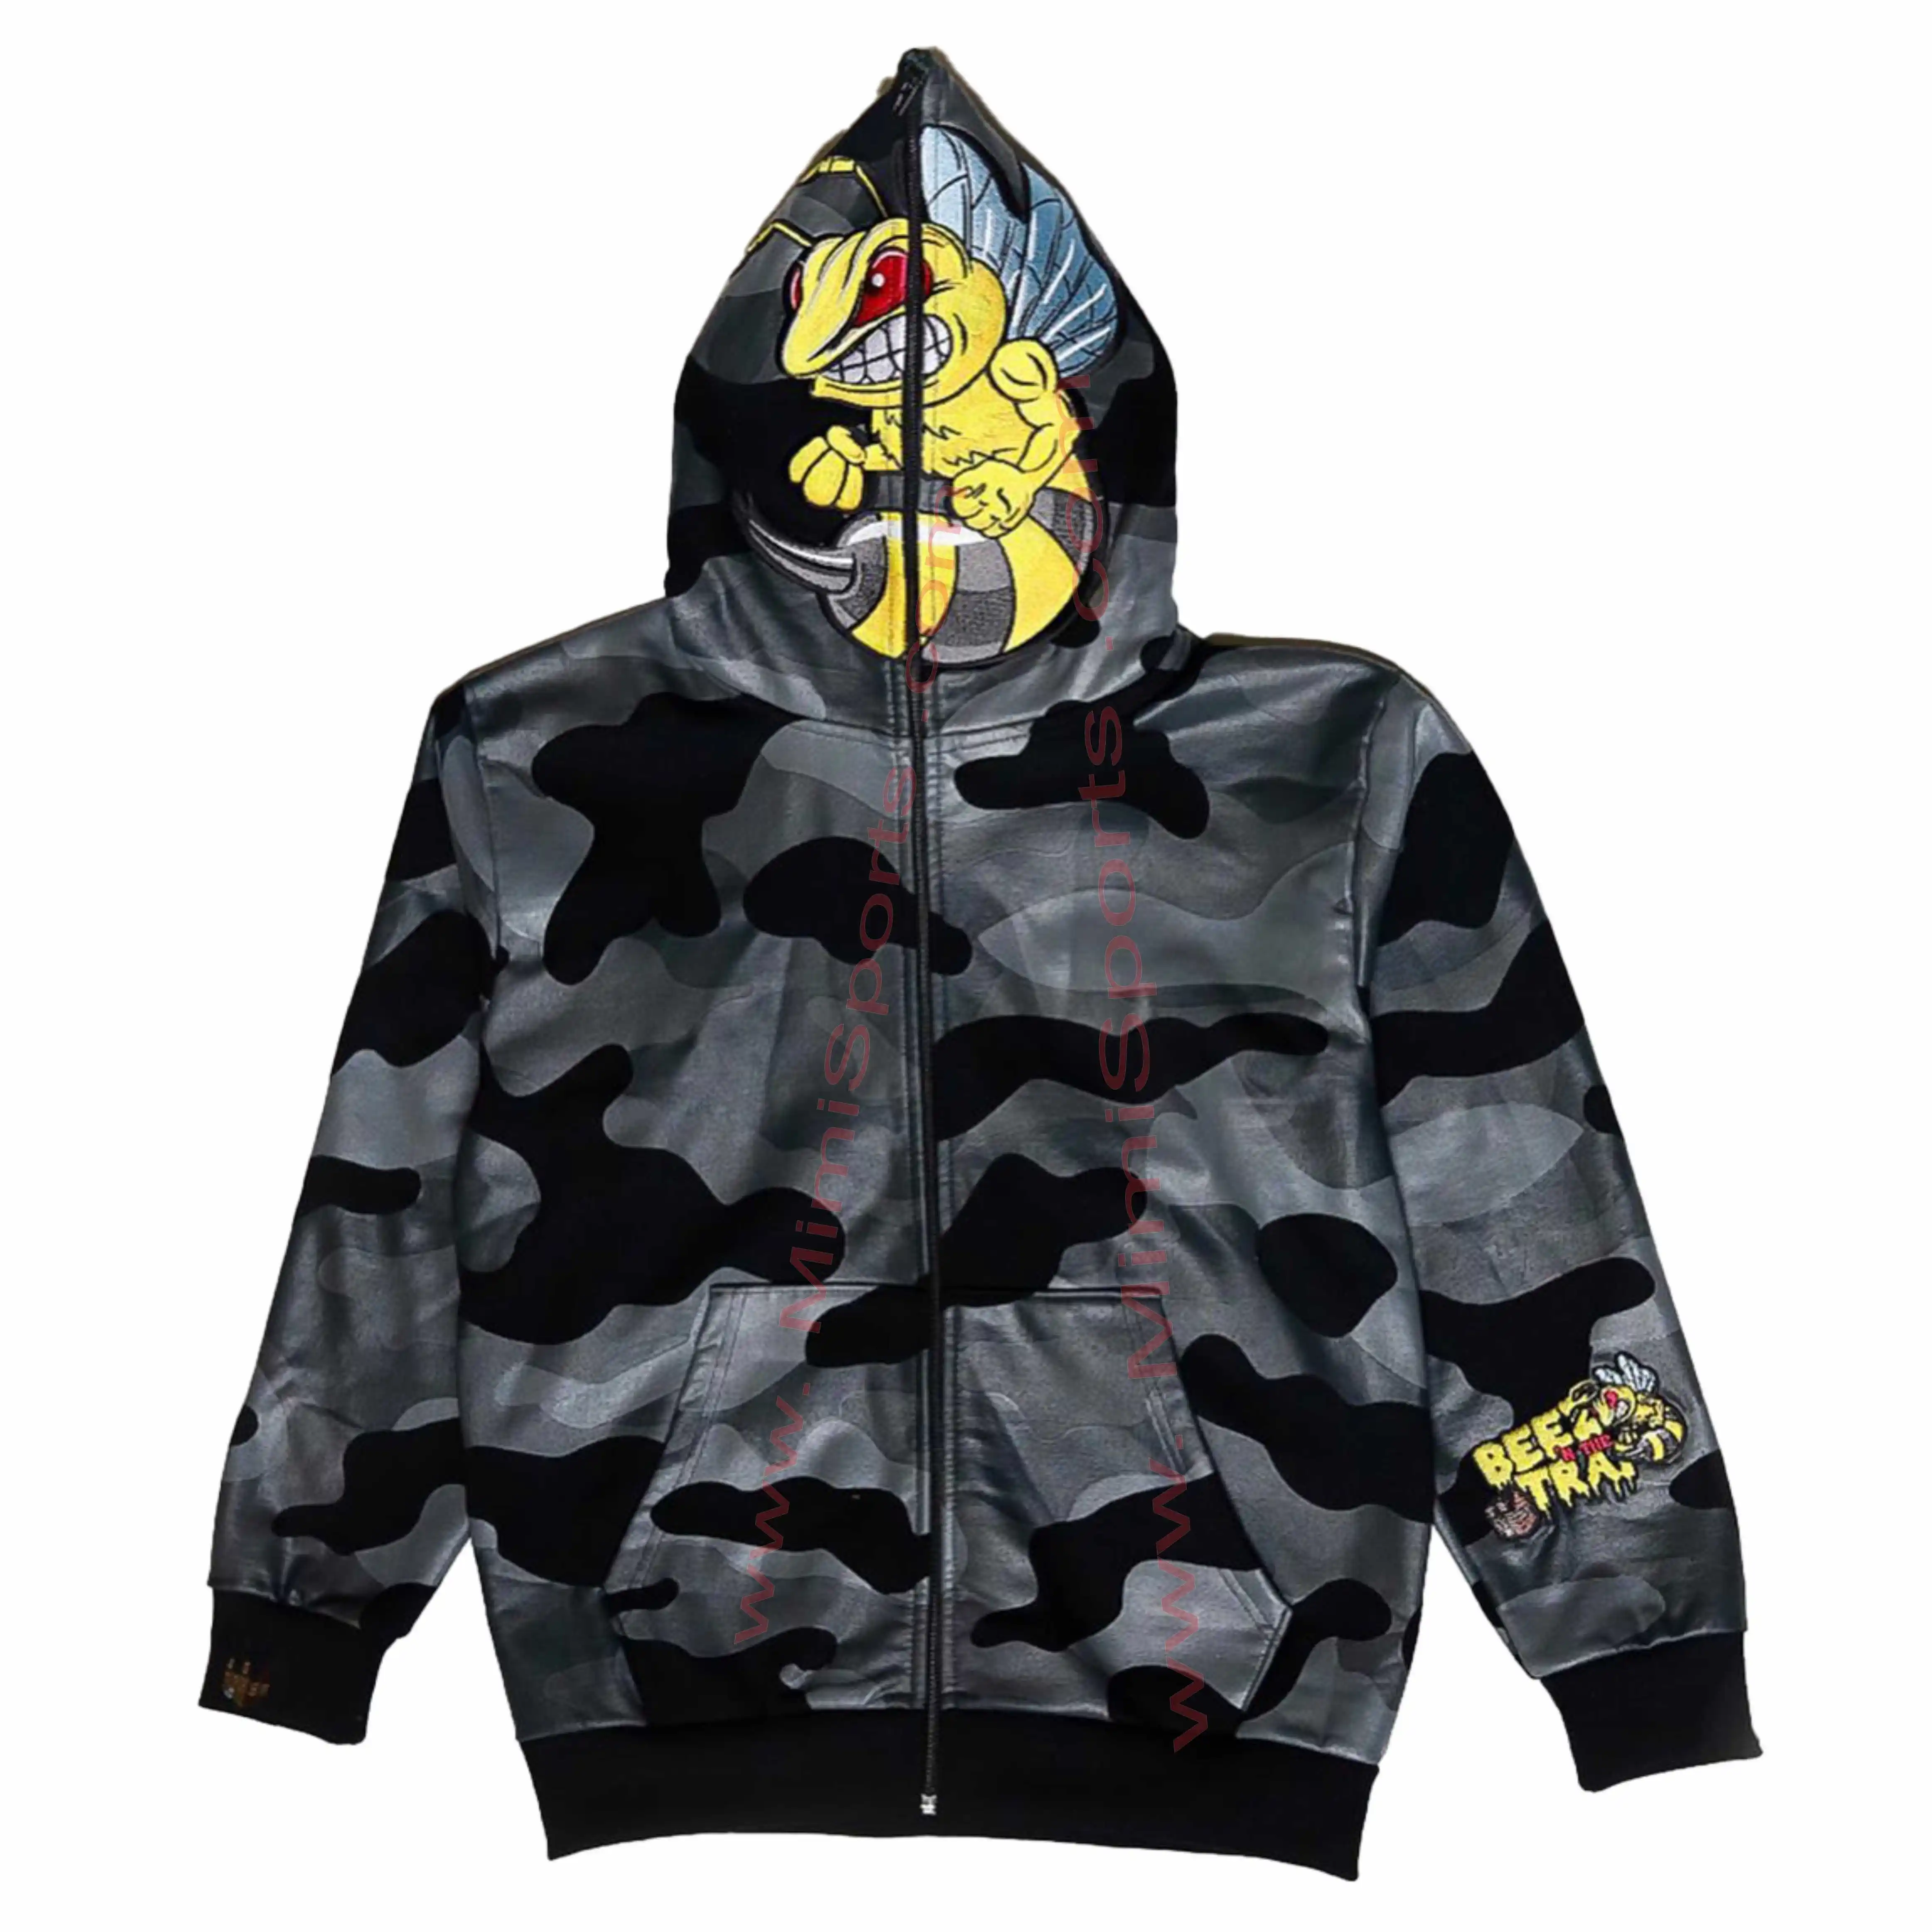 Sublimation Camo Printed Full Face Zipup Hoodie with High Quality Bee Embroidery with Low Price and Low MOQ - 2022